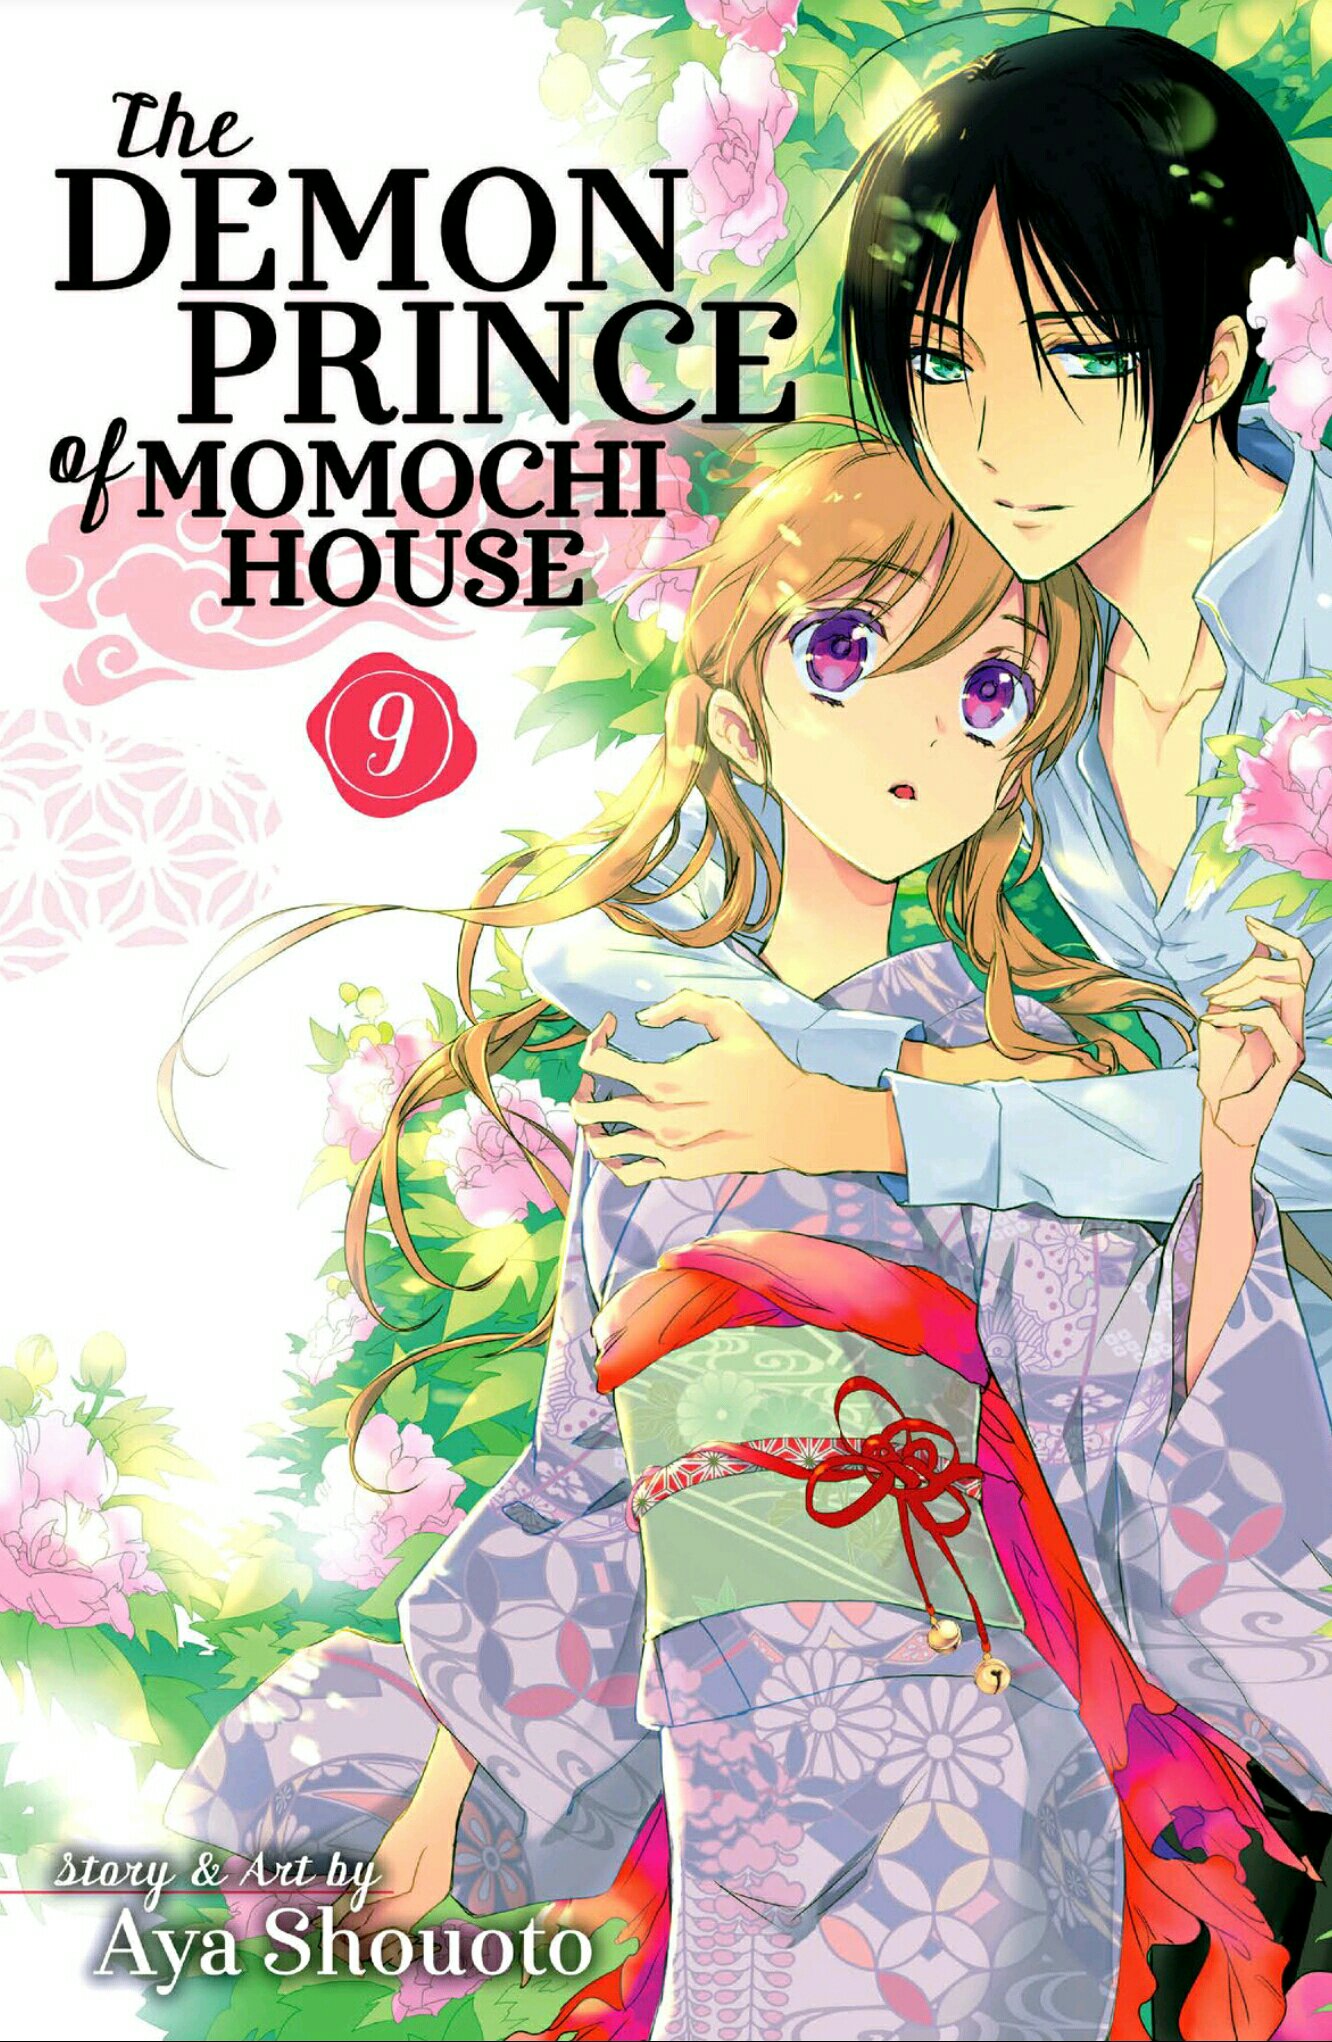 The Demon Prince of Momochi House - Volume 9